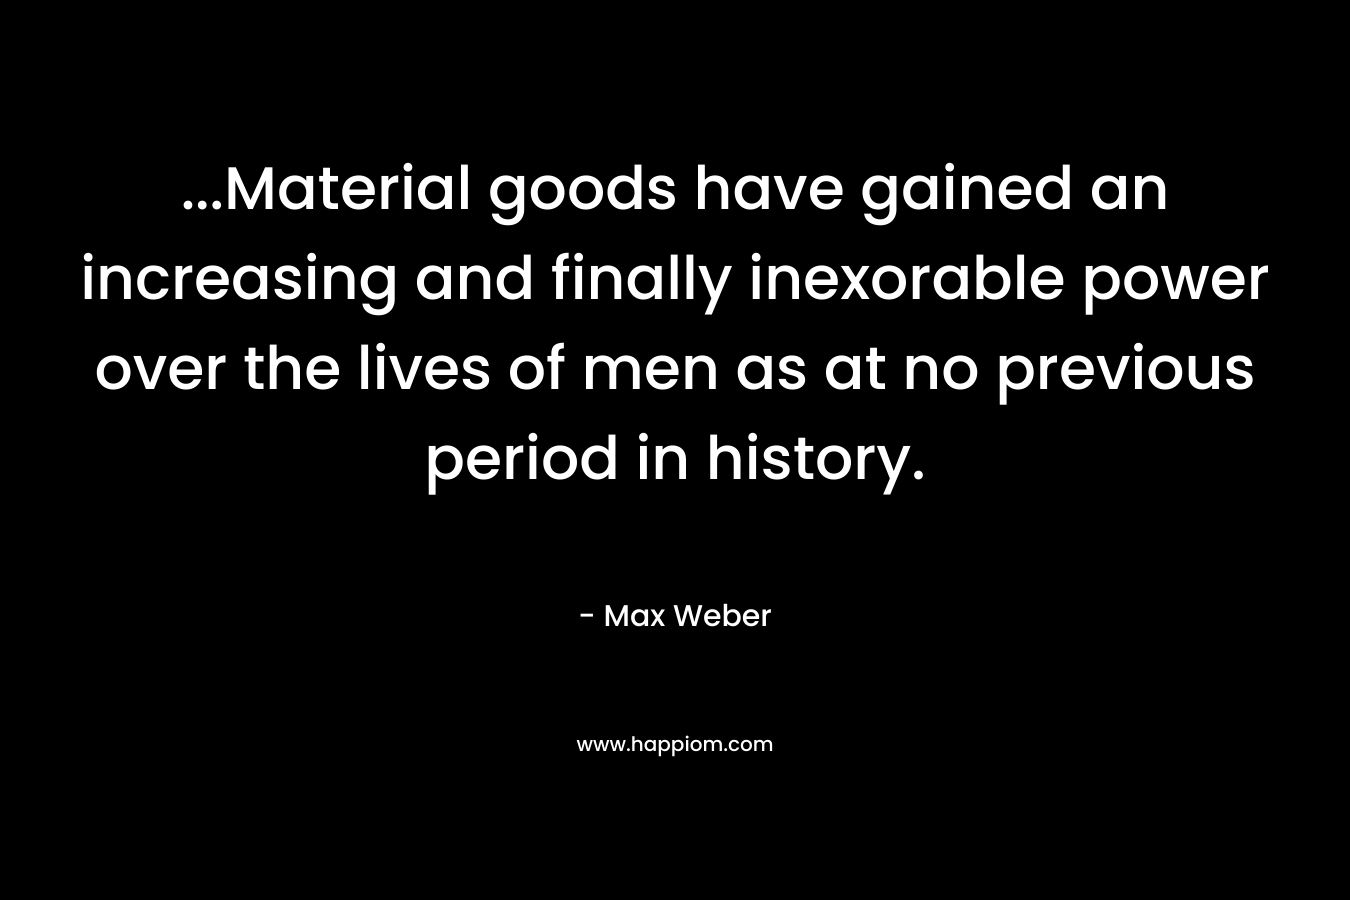 …Material goods have gained an increasing and finally inexorable power over the lives of men as at no previous period in history. – Max Weber